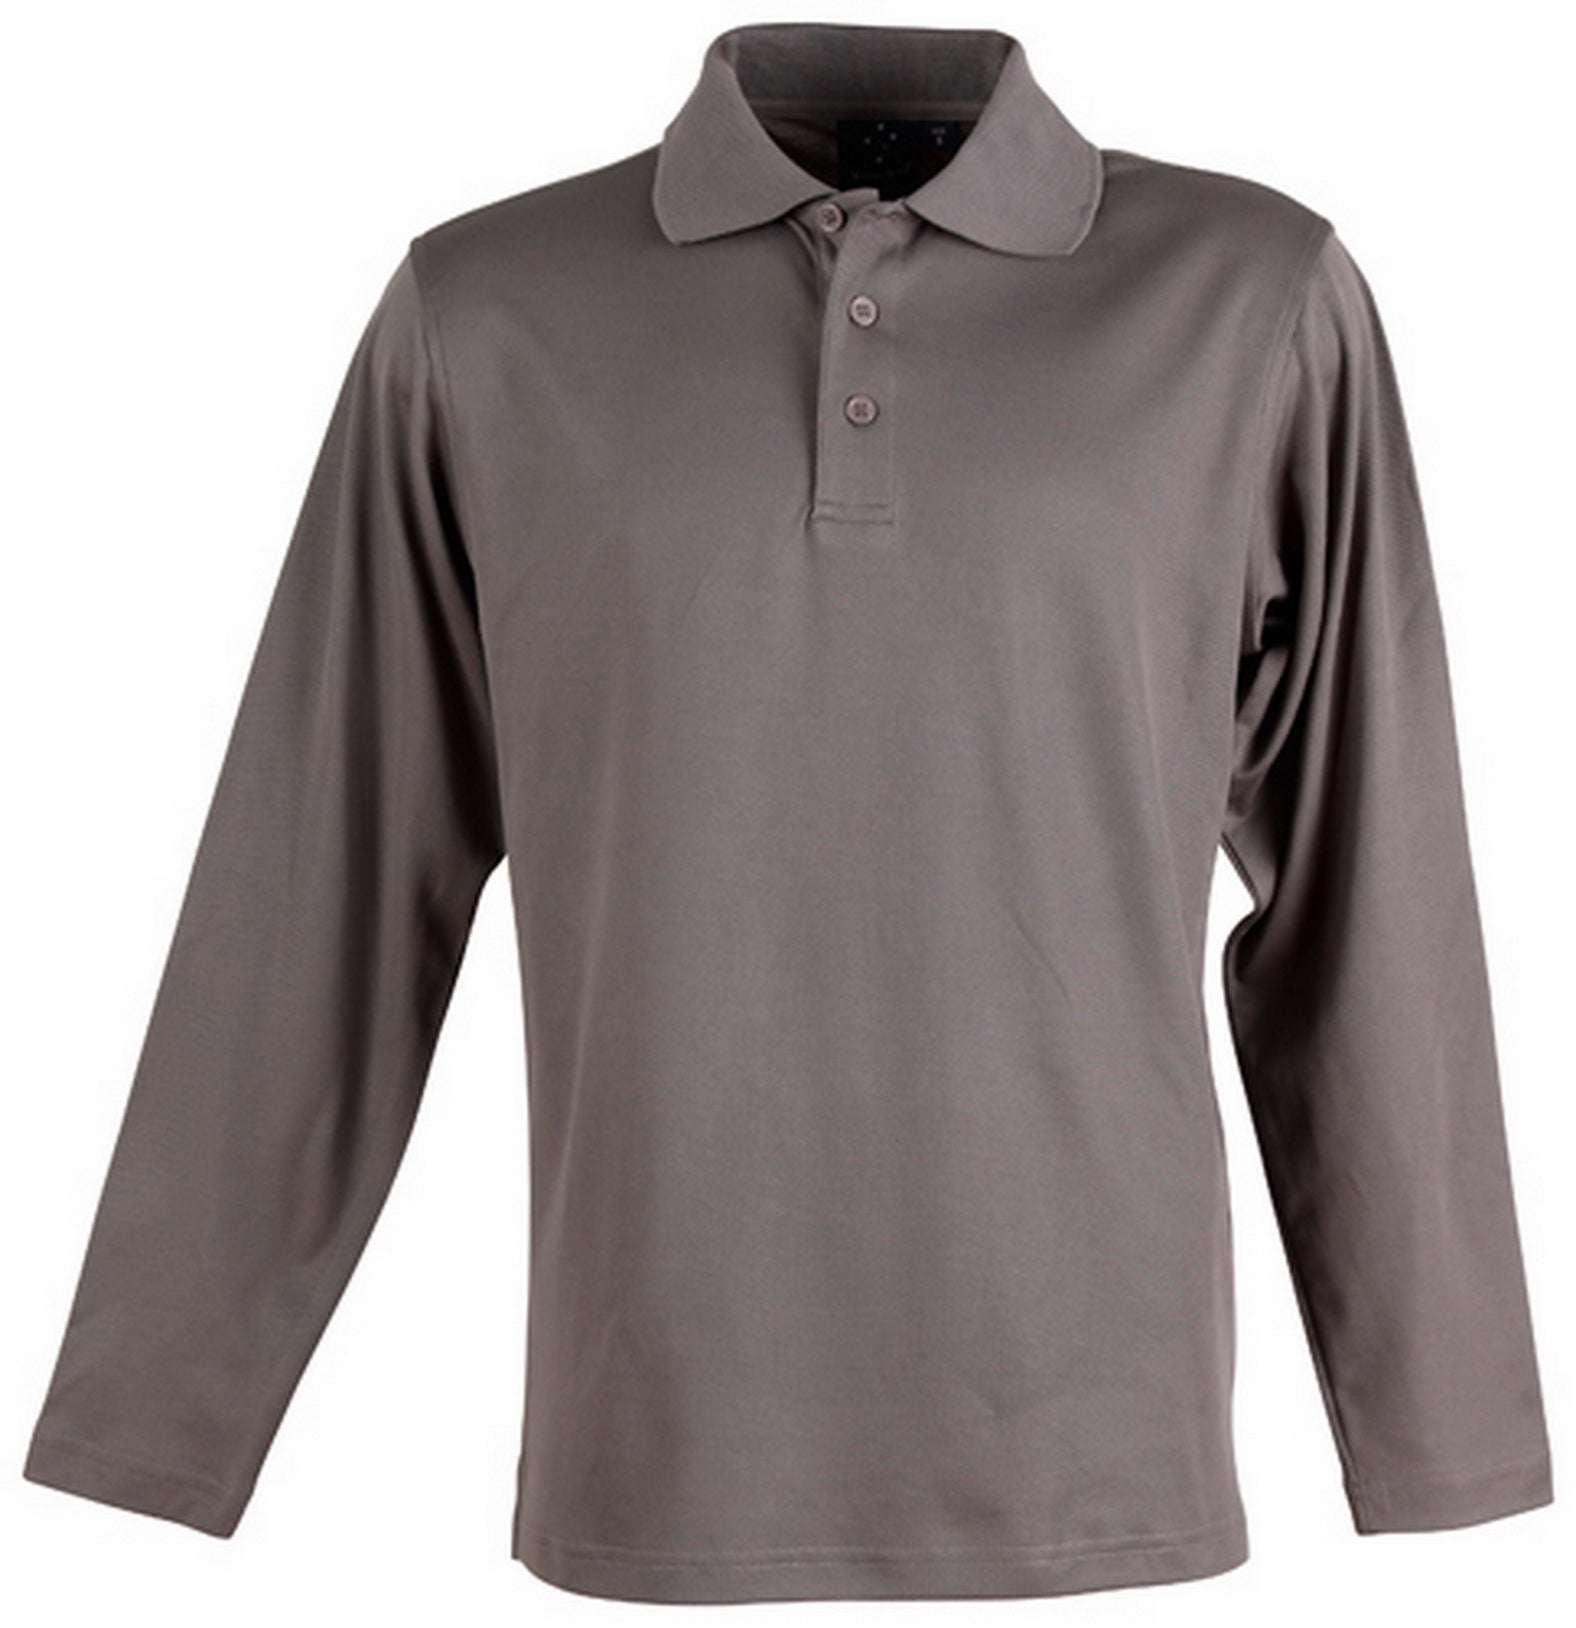 Long Sleeve Victory Truedry Polo - made by AIW